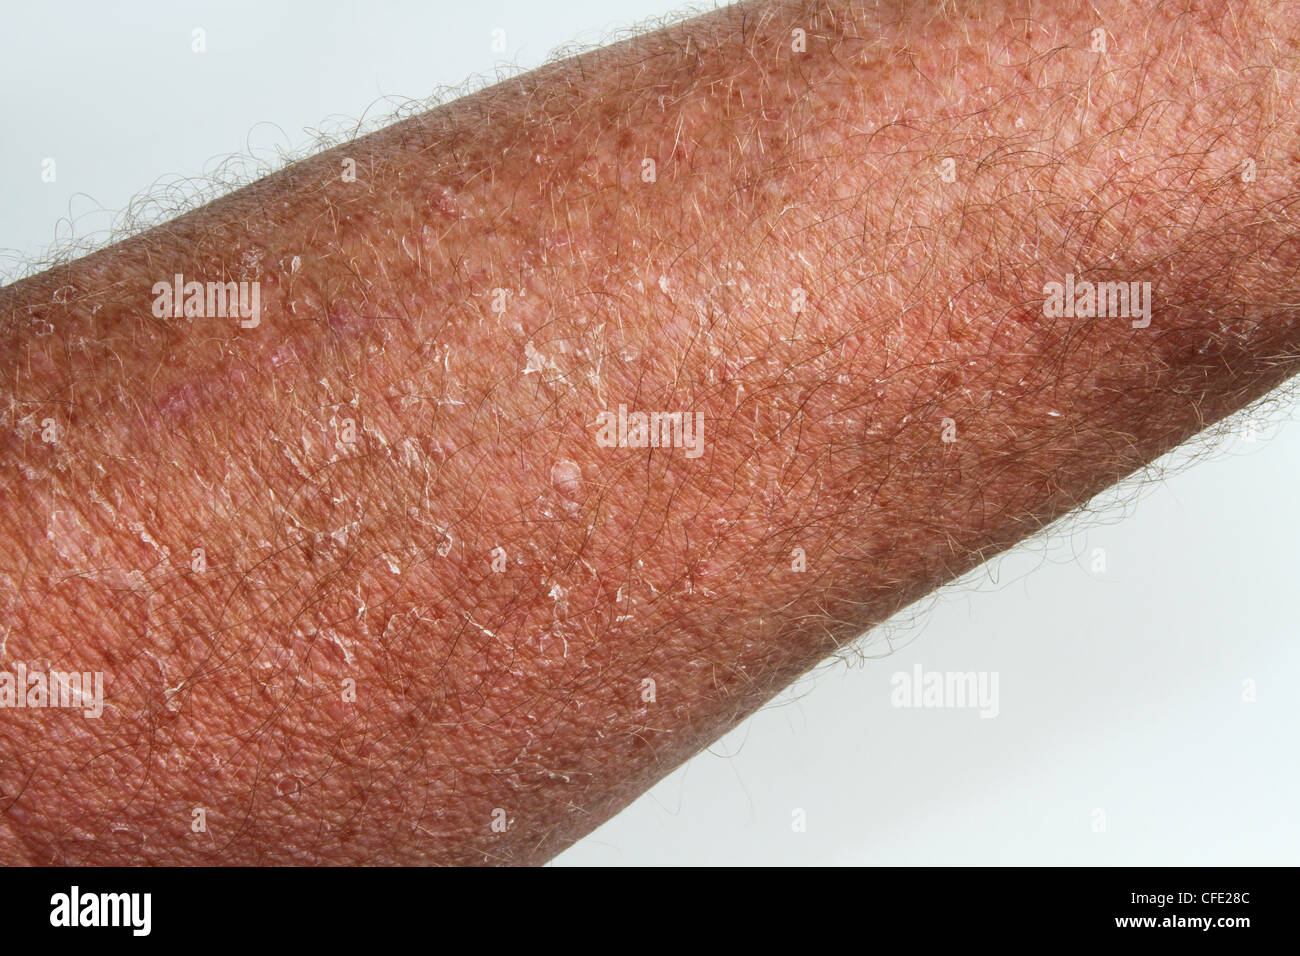 Sunburned Peeling Skin. Dead skin peeling due to overexposure in the sun about 12 days earlier. Caucasion male forearm shown. Stock Photo